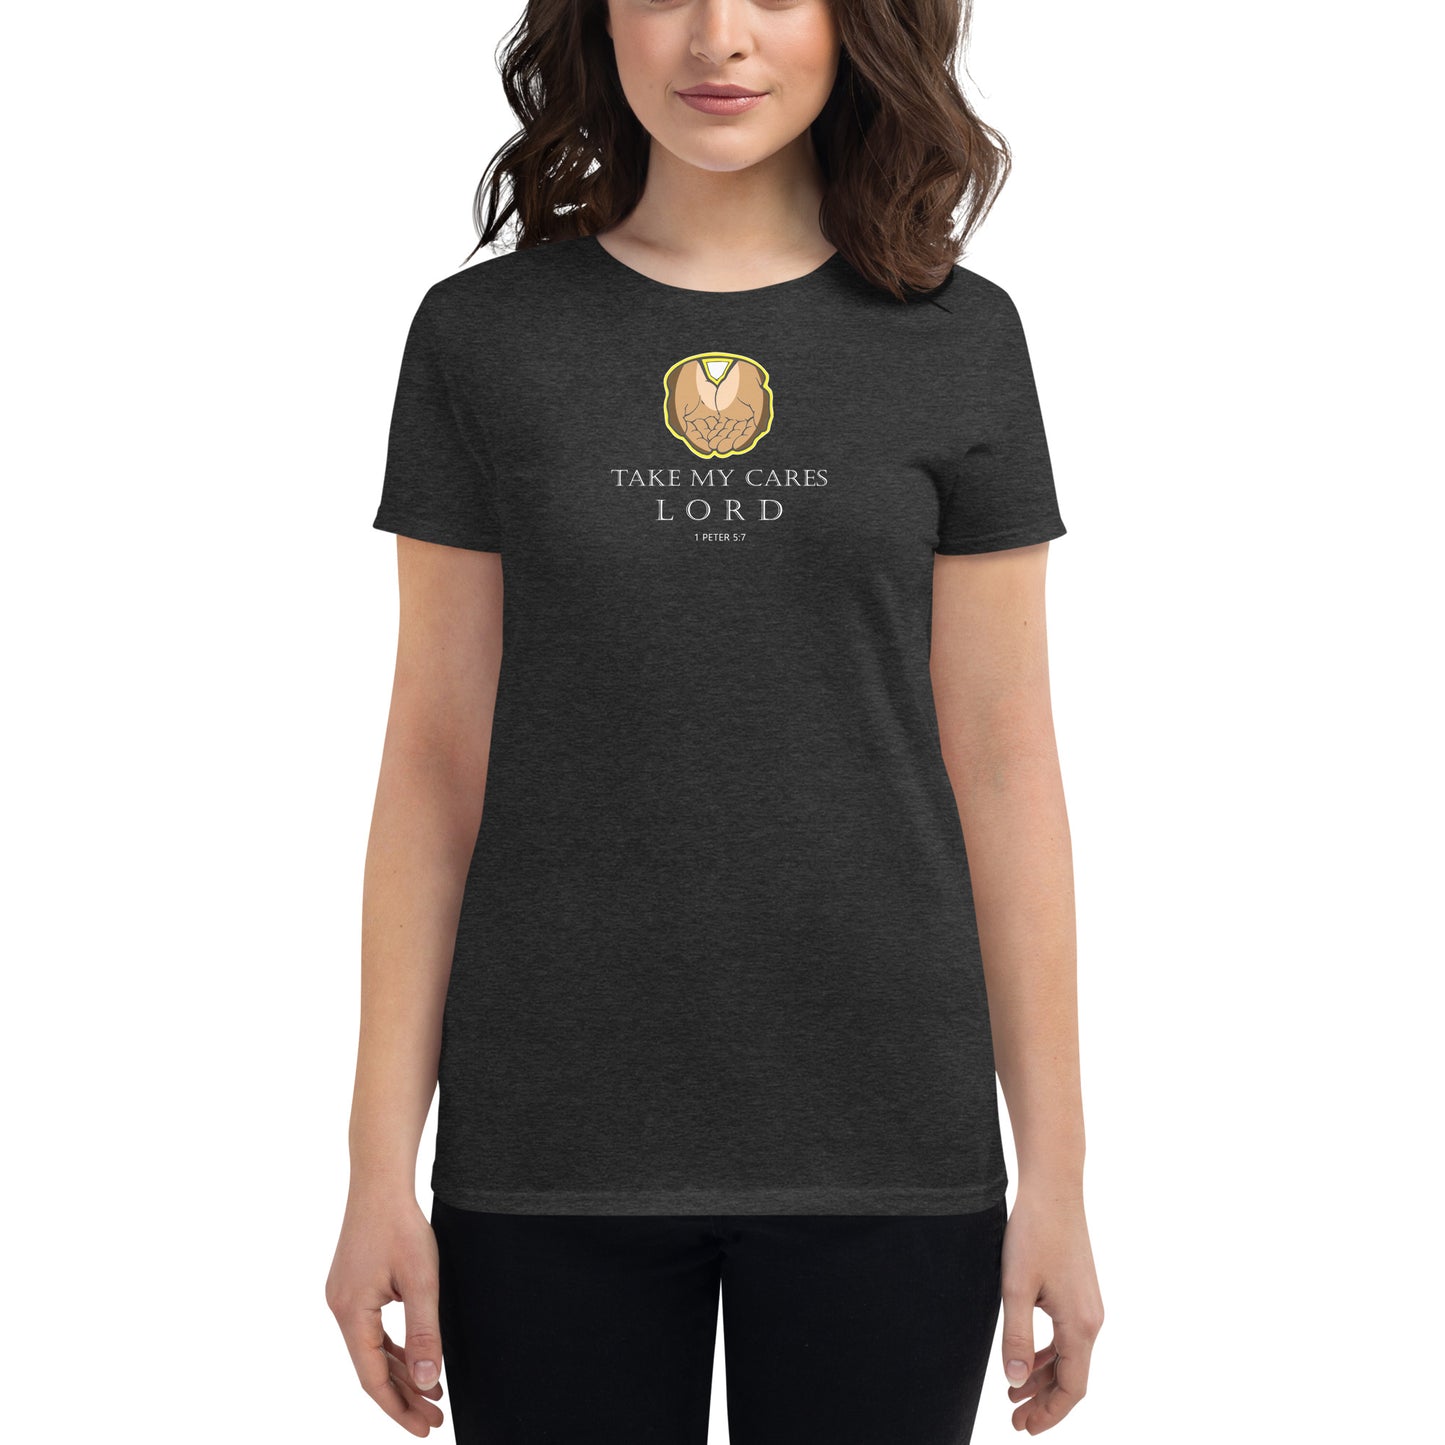 Women's short sleeve T shirt - TAKE MY CARES LORD